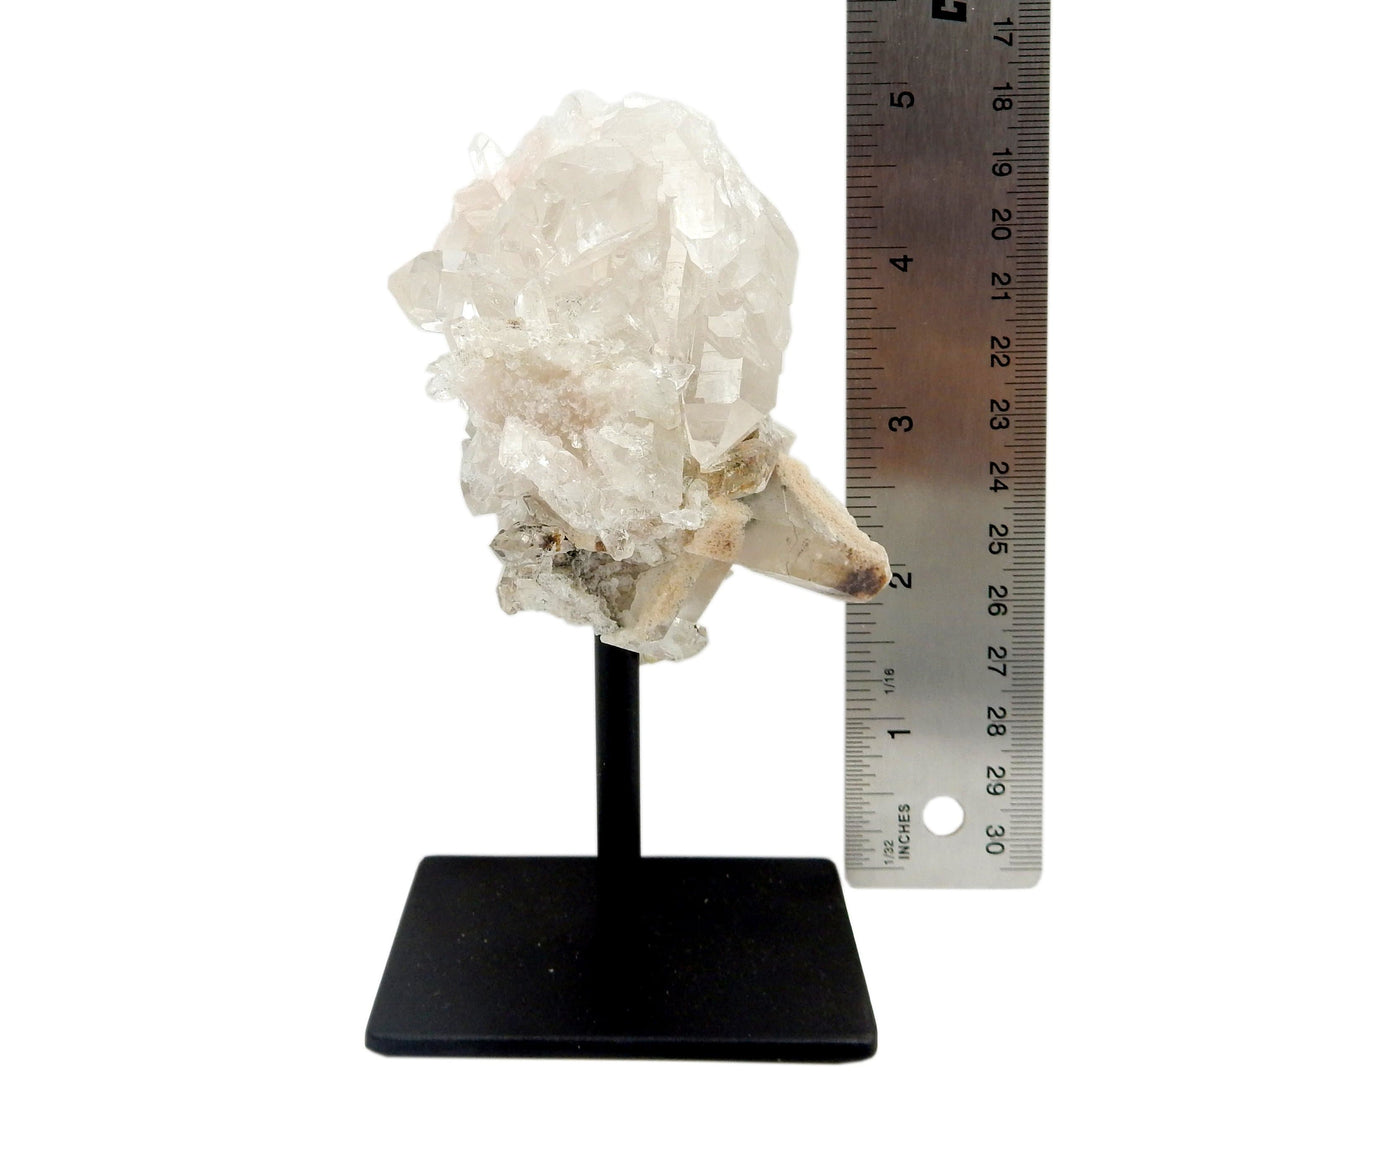 one Crystal Quartz Cluster on Metal Stand displayed next to a ruler for size reference.